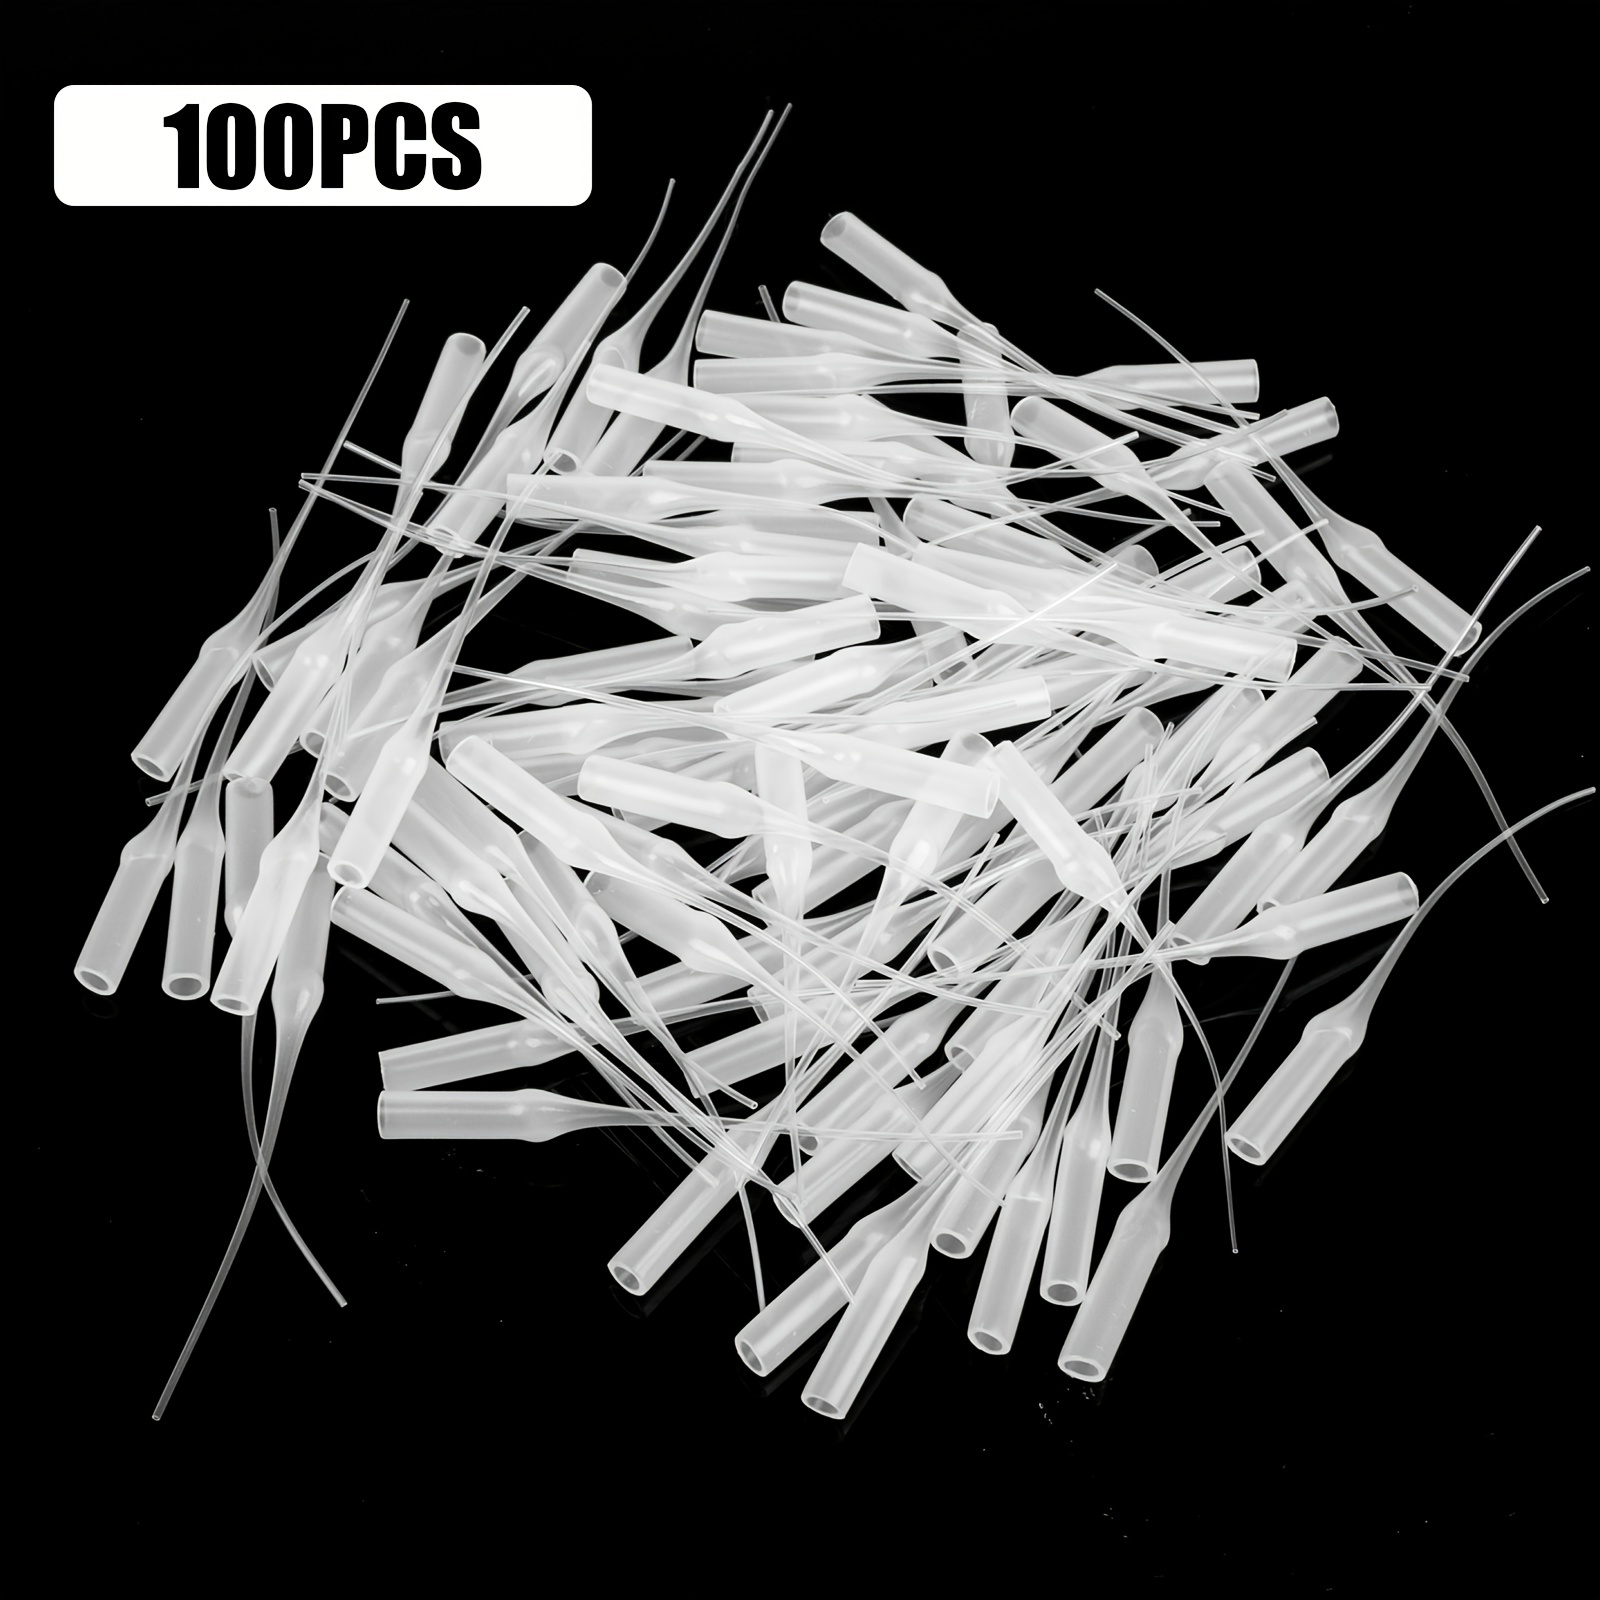 Glue Tips 100pcs Plastic Glue Micro-Tips Glue Extender Precision CA Glue  Applicator for Arts Crafts Hobby Projects Guitar Fret Slot White 